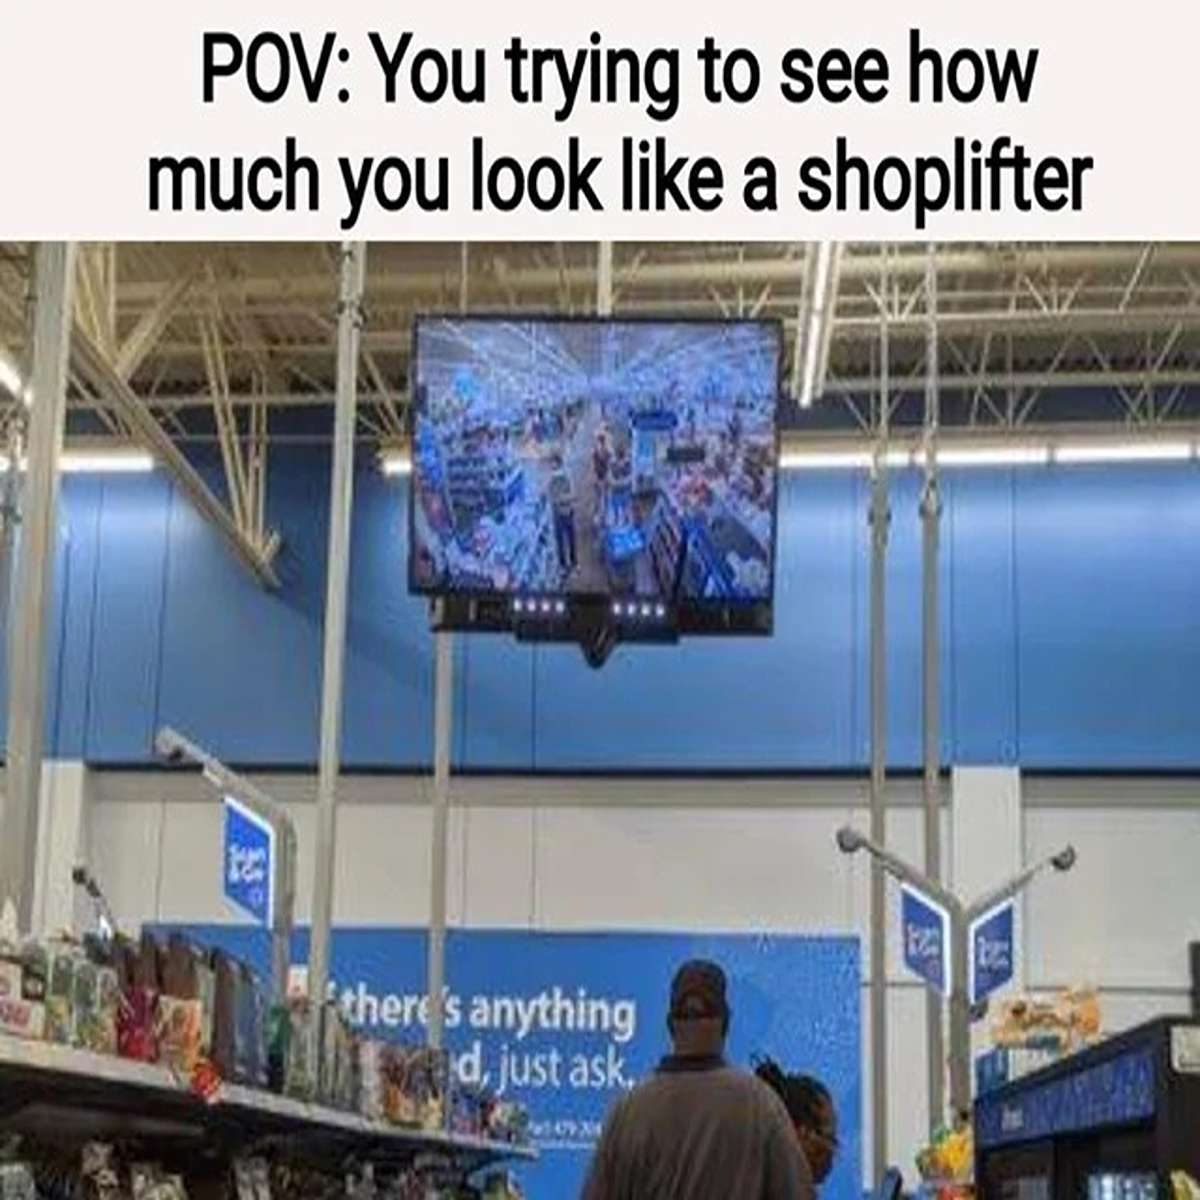 dank memes - sport venue - Pov You trying to see how much you look a shoplifter there's anything d, just ask. 1934